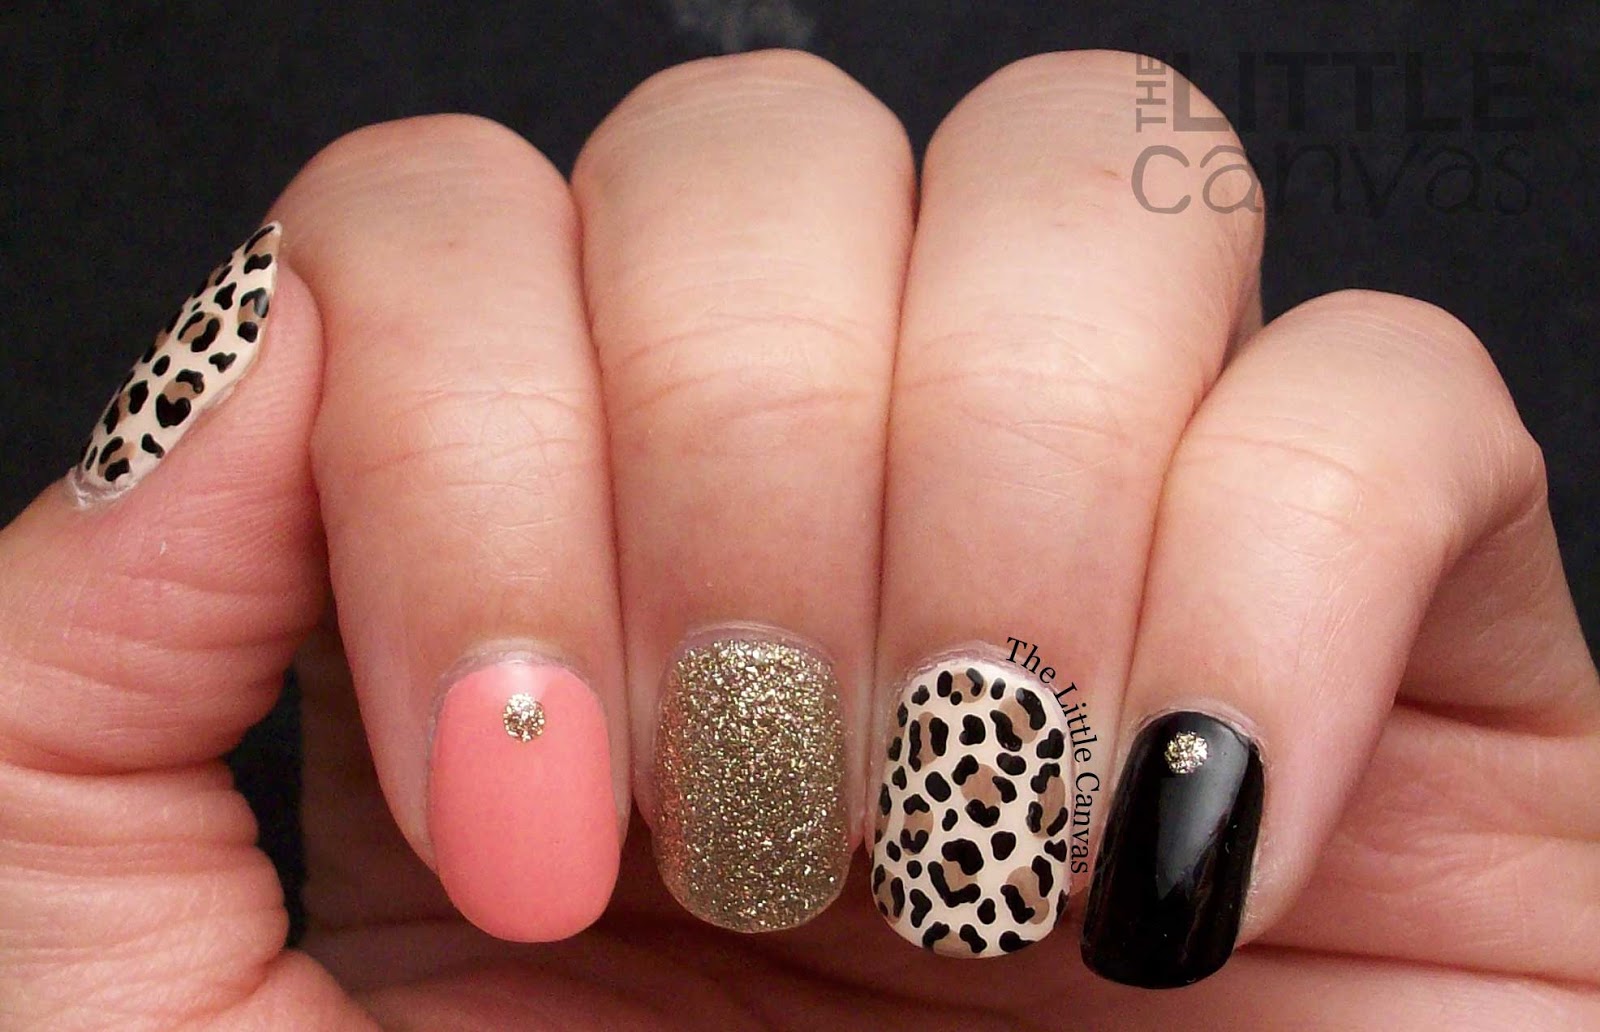 Easy Leopard and Rose Nail Art Designs - wide 3